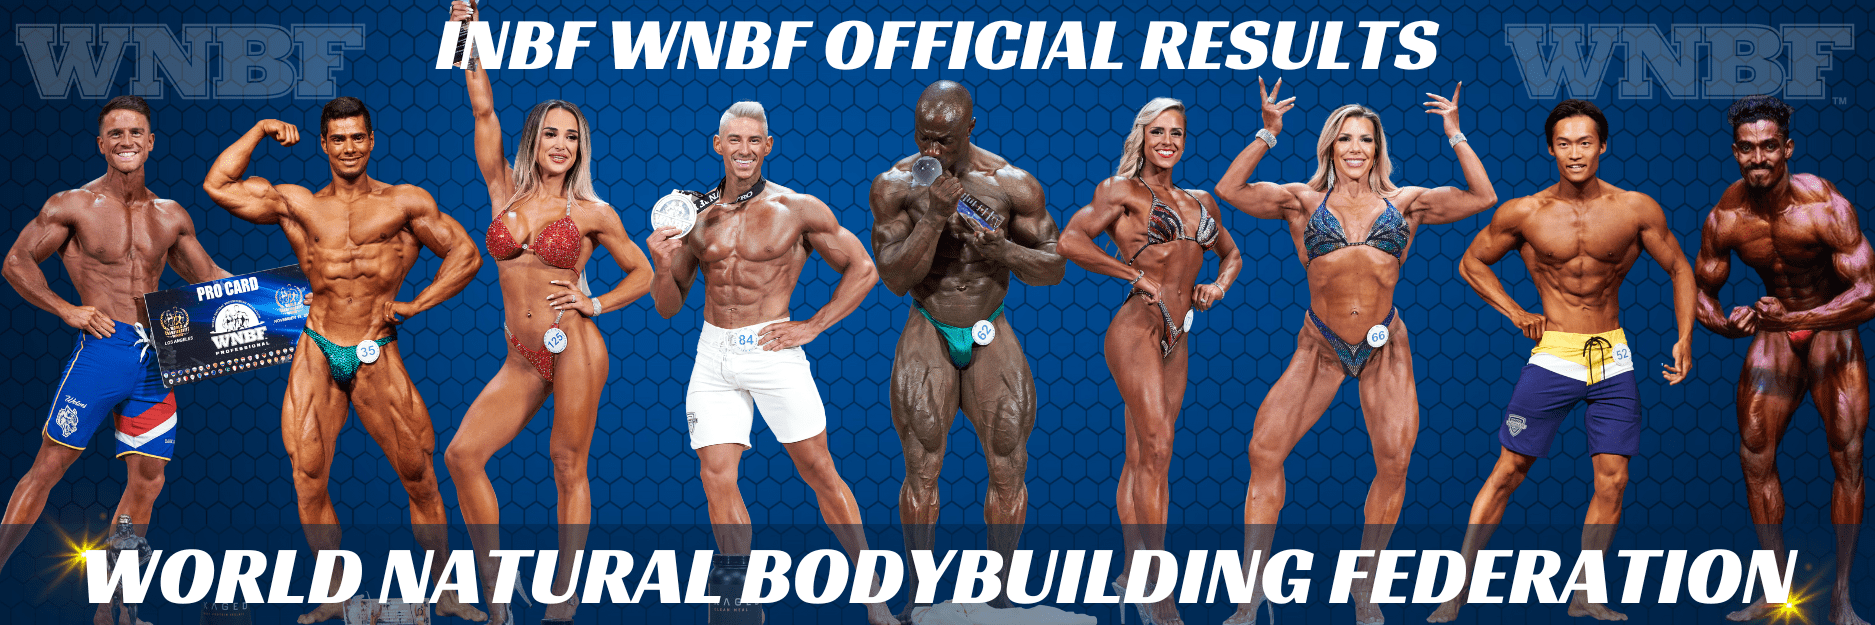 Natural Bodybuilding INBF WNBF Official Contest Results Athlete Banner